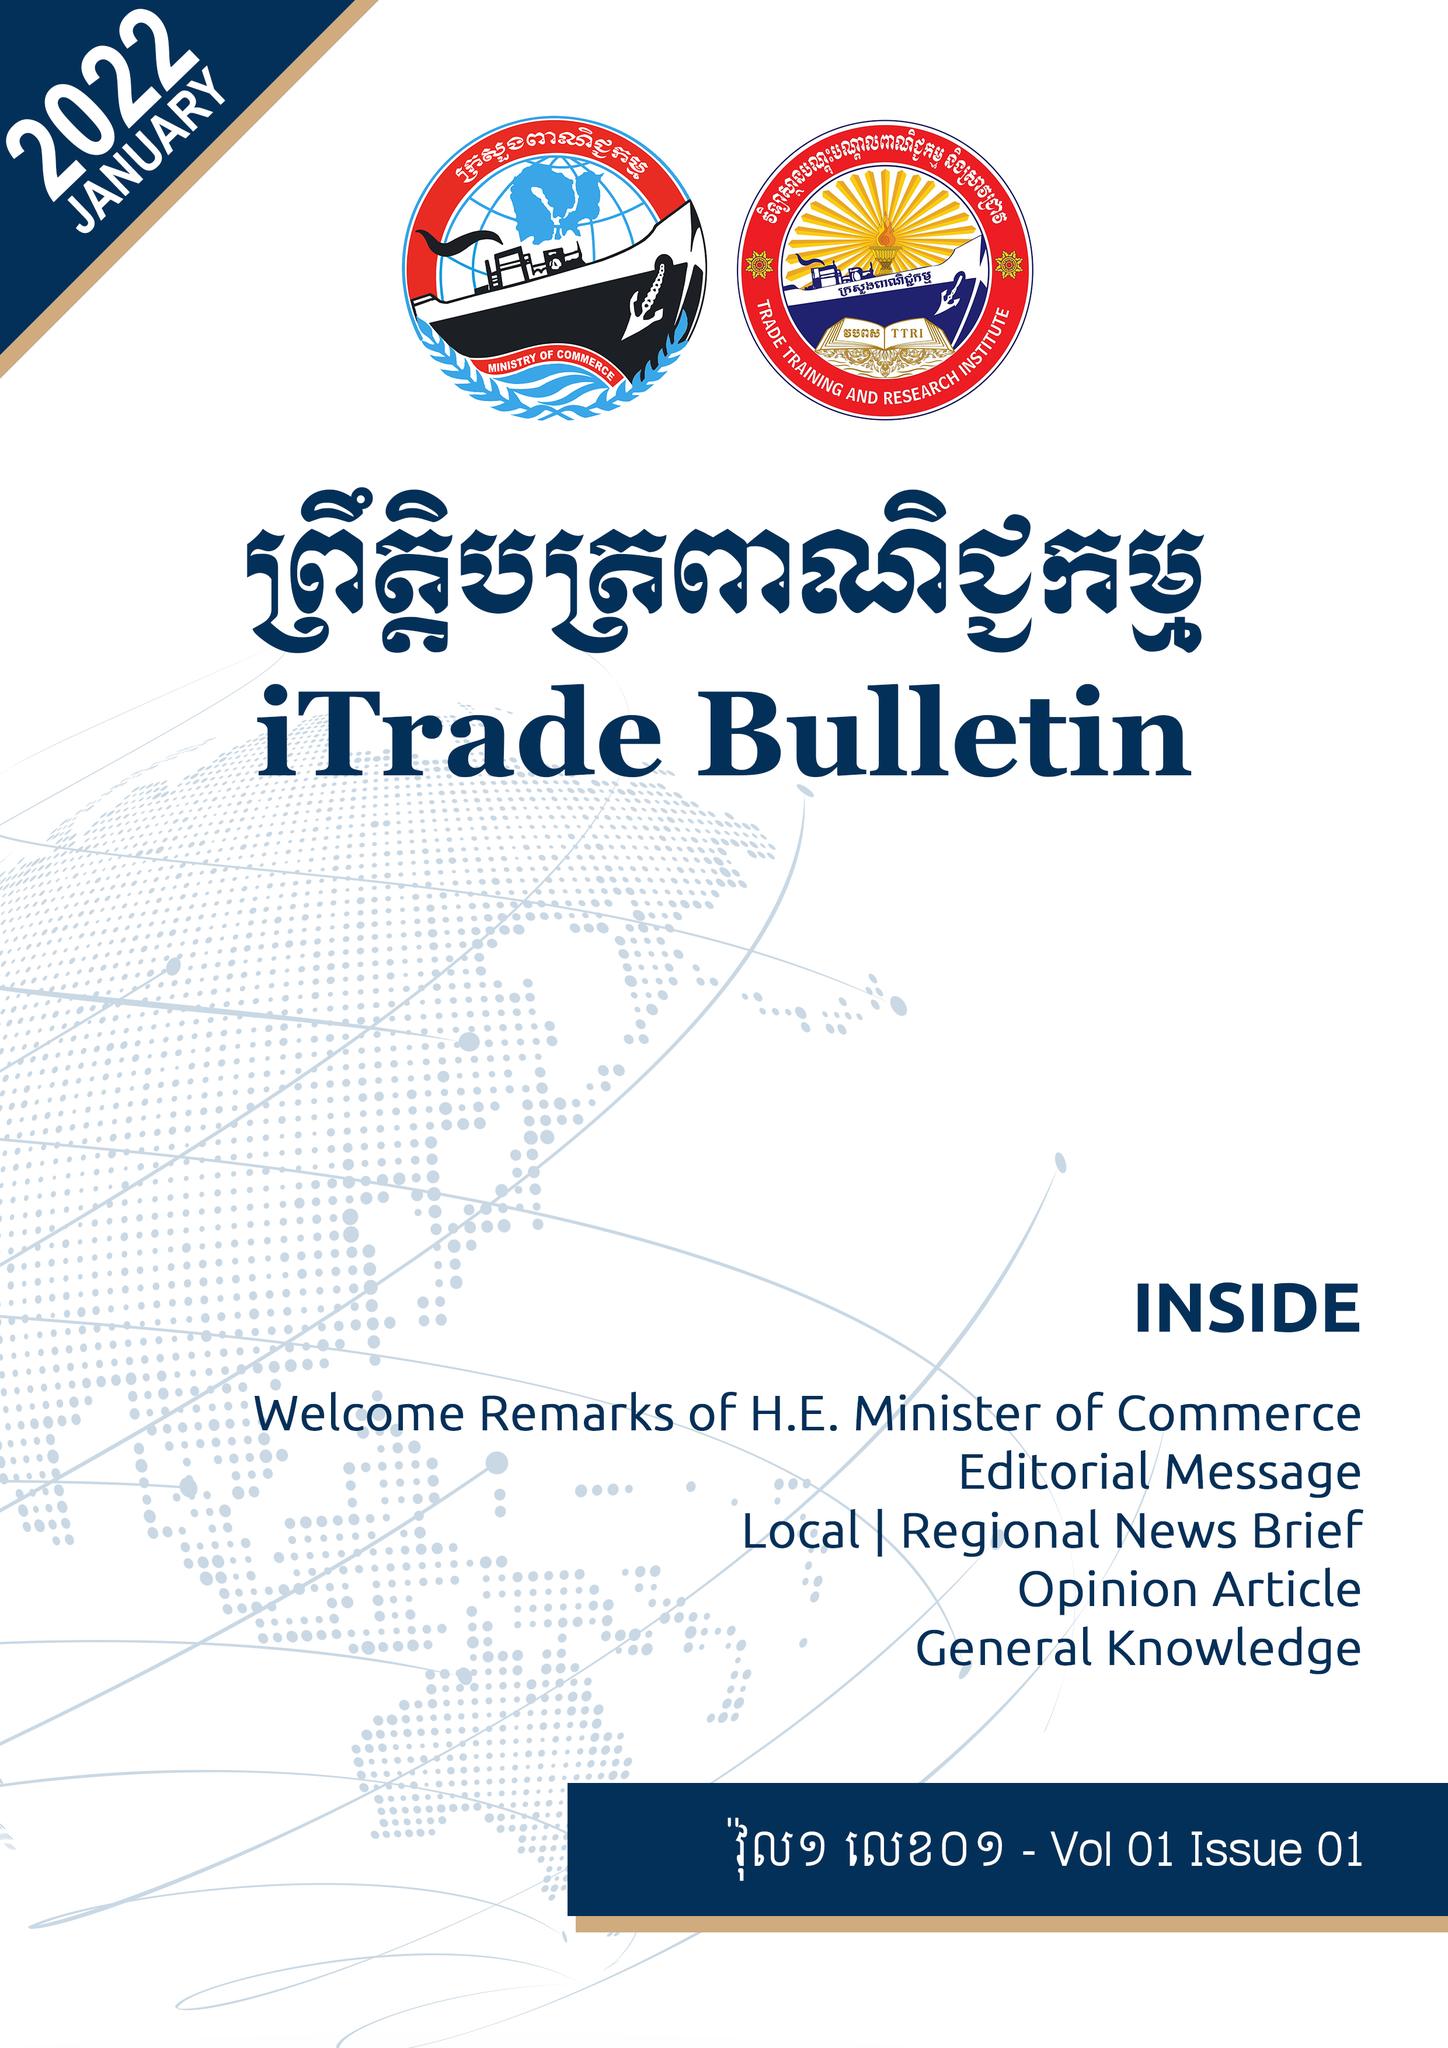 iTrade Bulletin No 01 (in Khmer and English) for January 2022